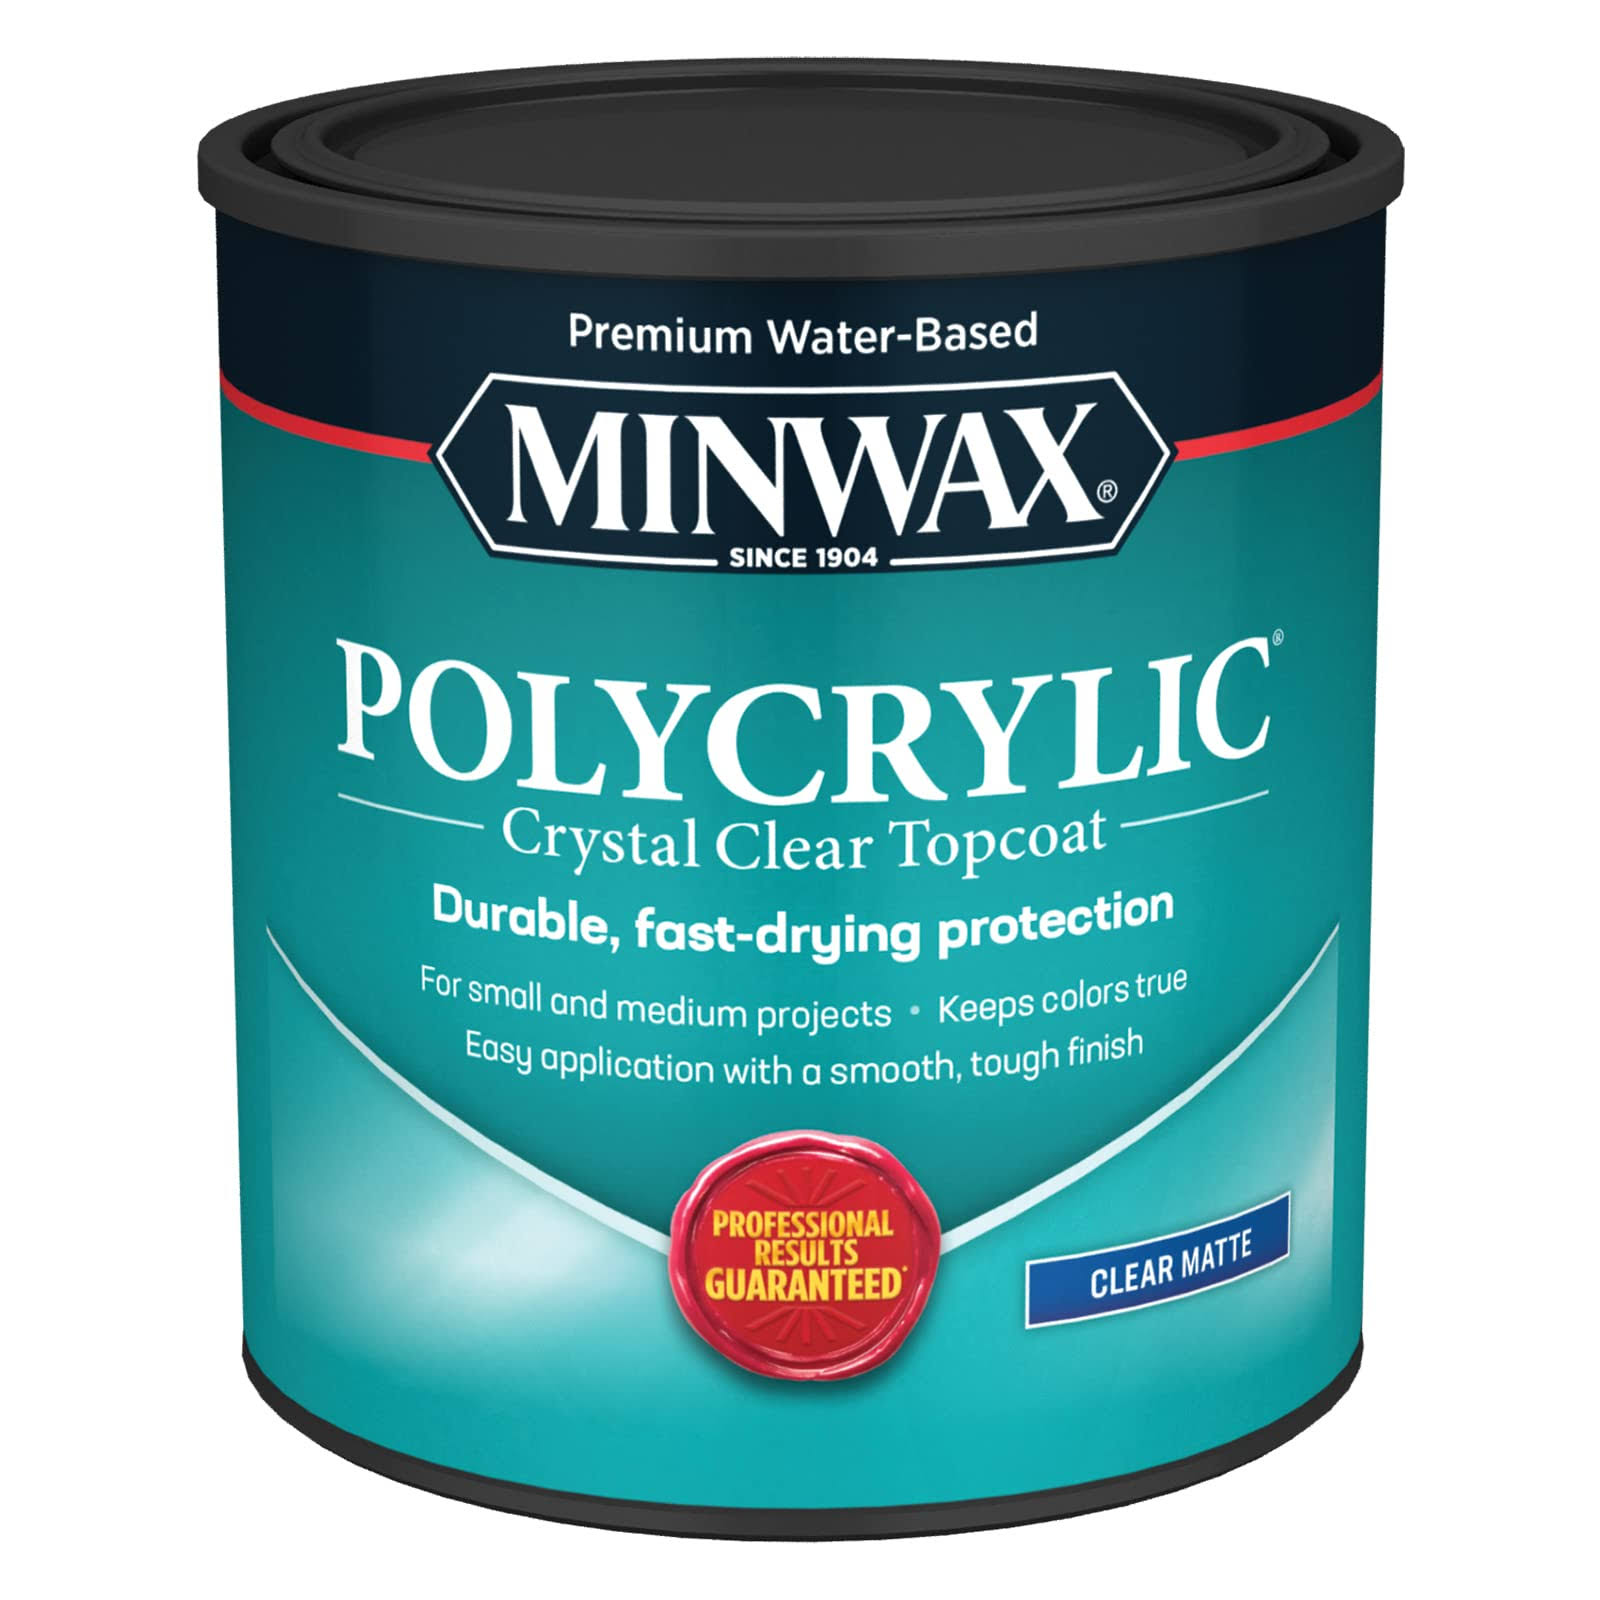 Minwax 622224444 Polycrylic Protective Finish Paint - Clear Matte, 32oz, Water Based